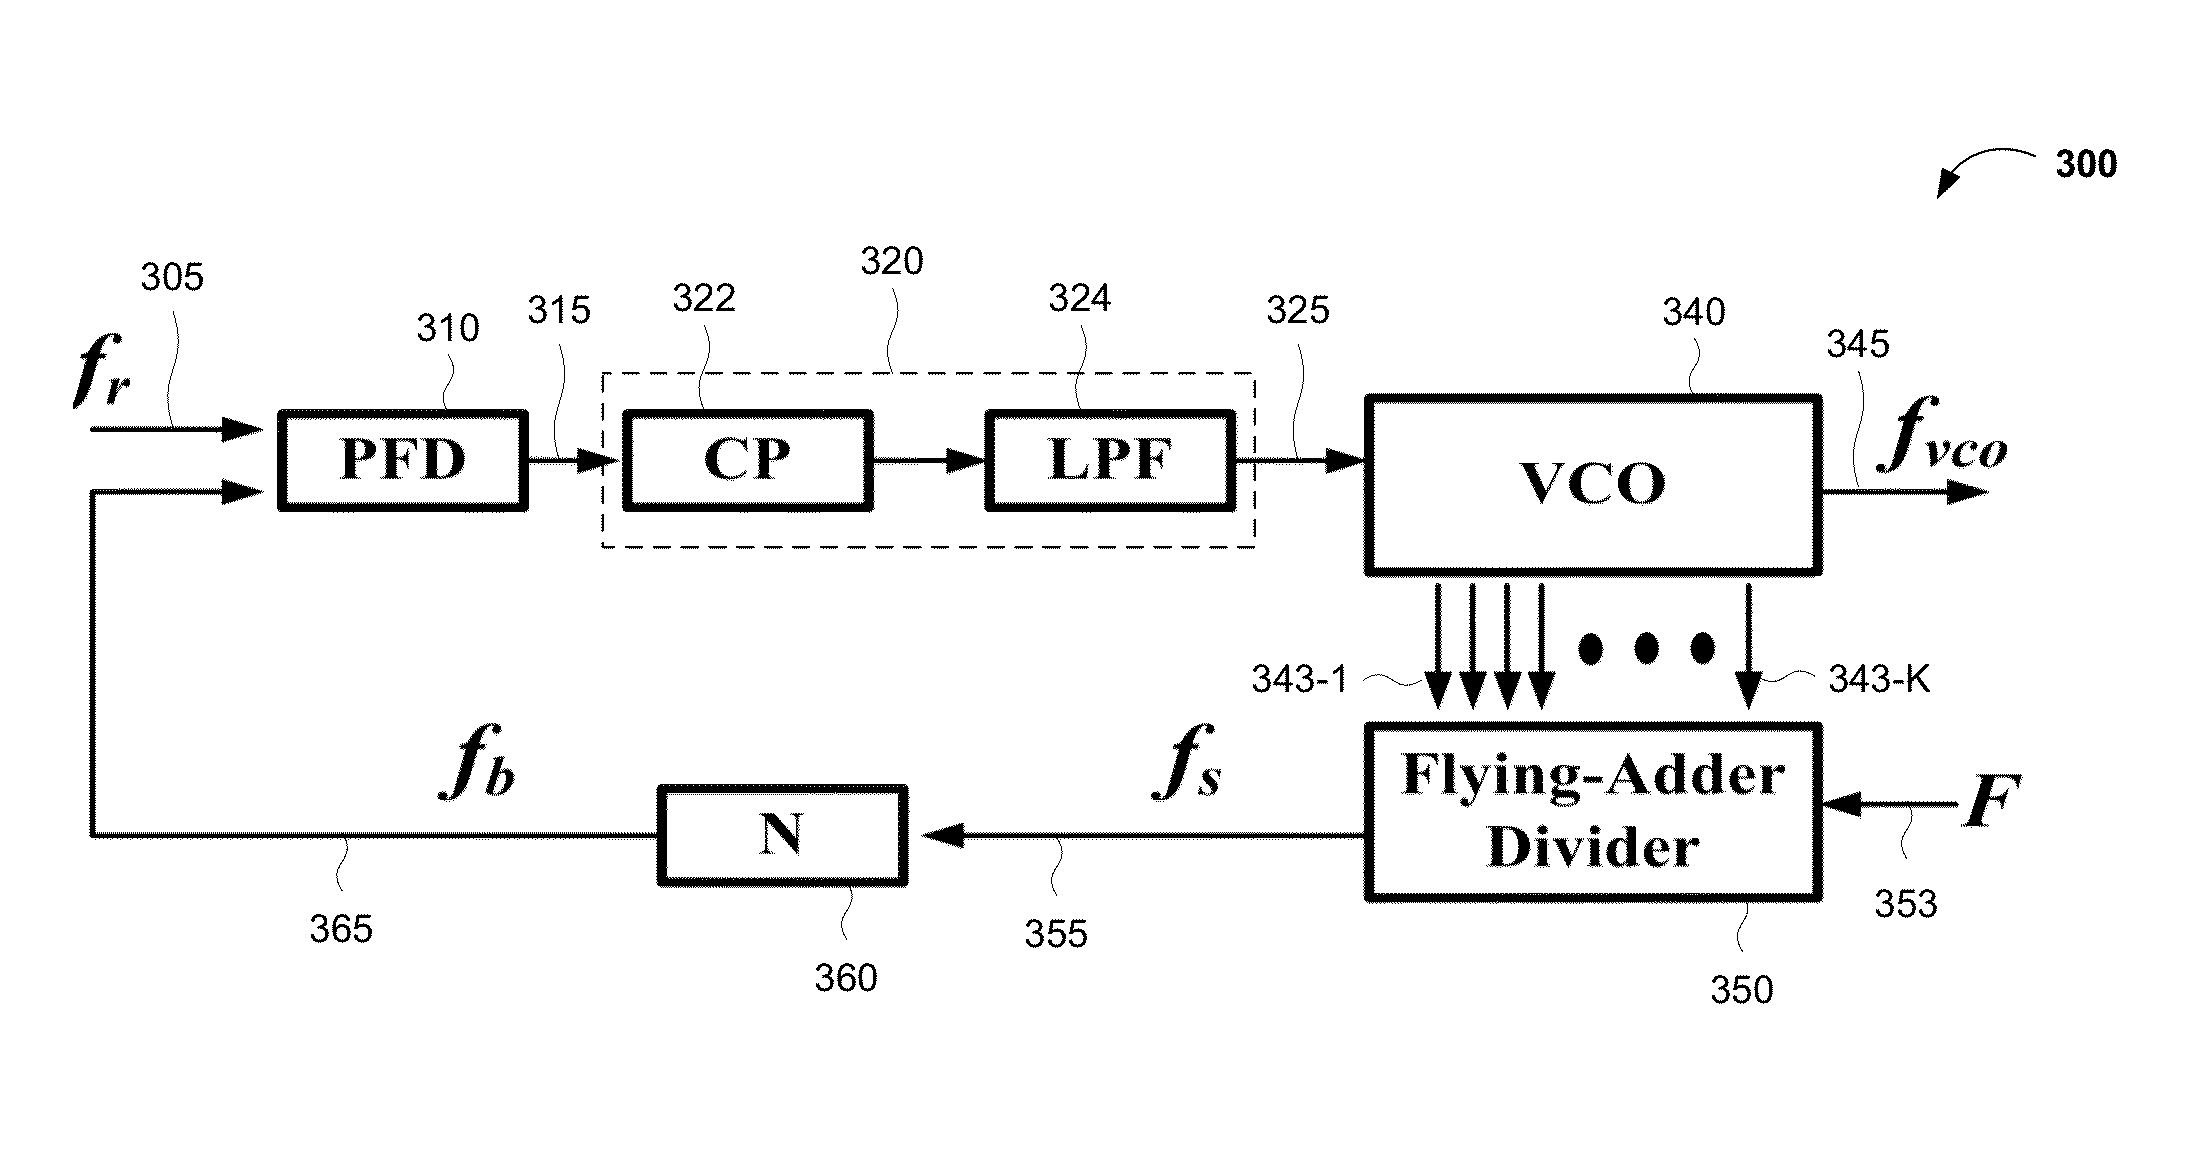 Circuits and methods for clock generation using a flying-adder divider inside and optionally outside a phase locked loop